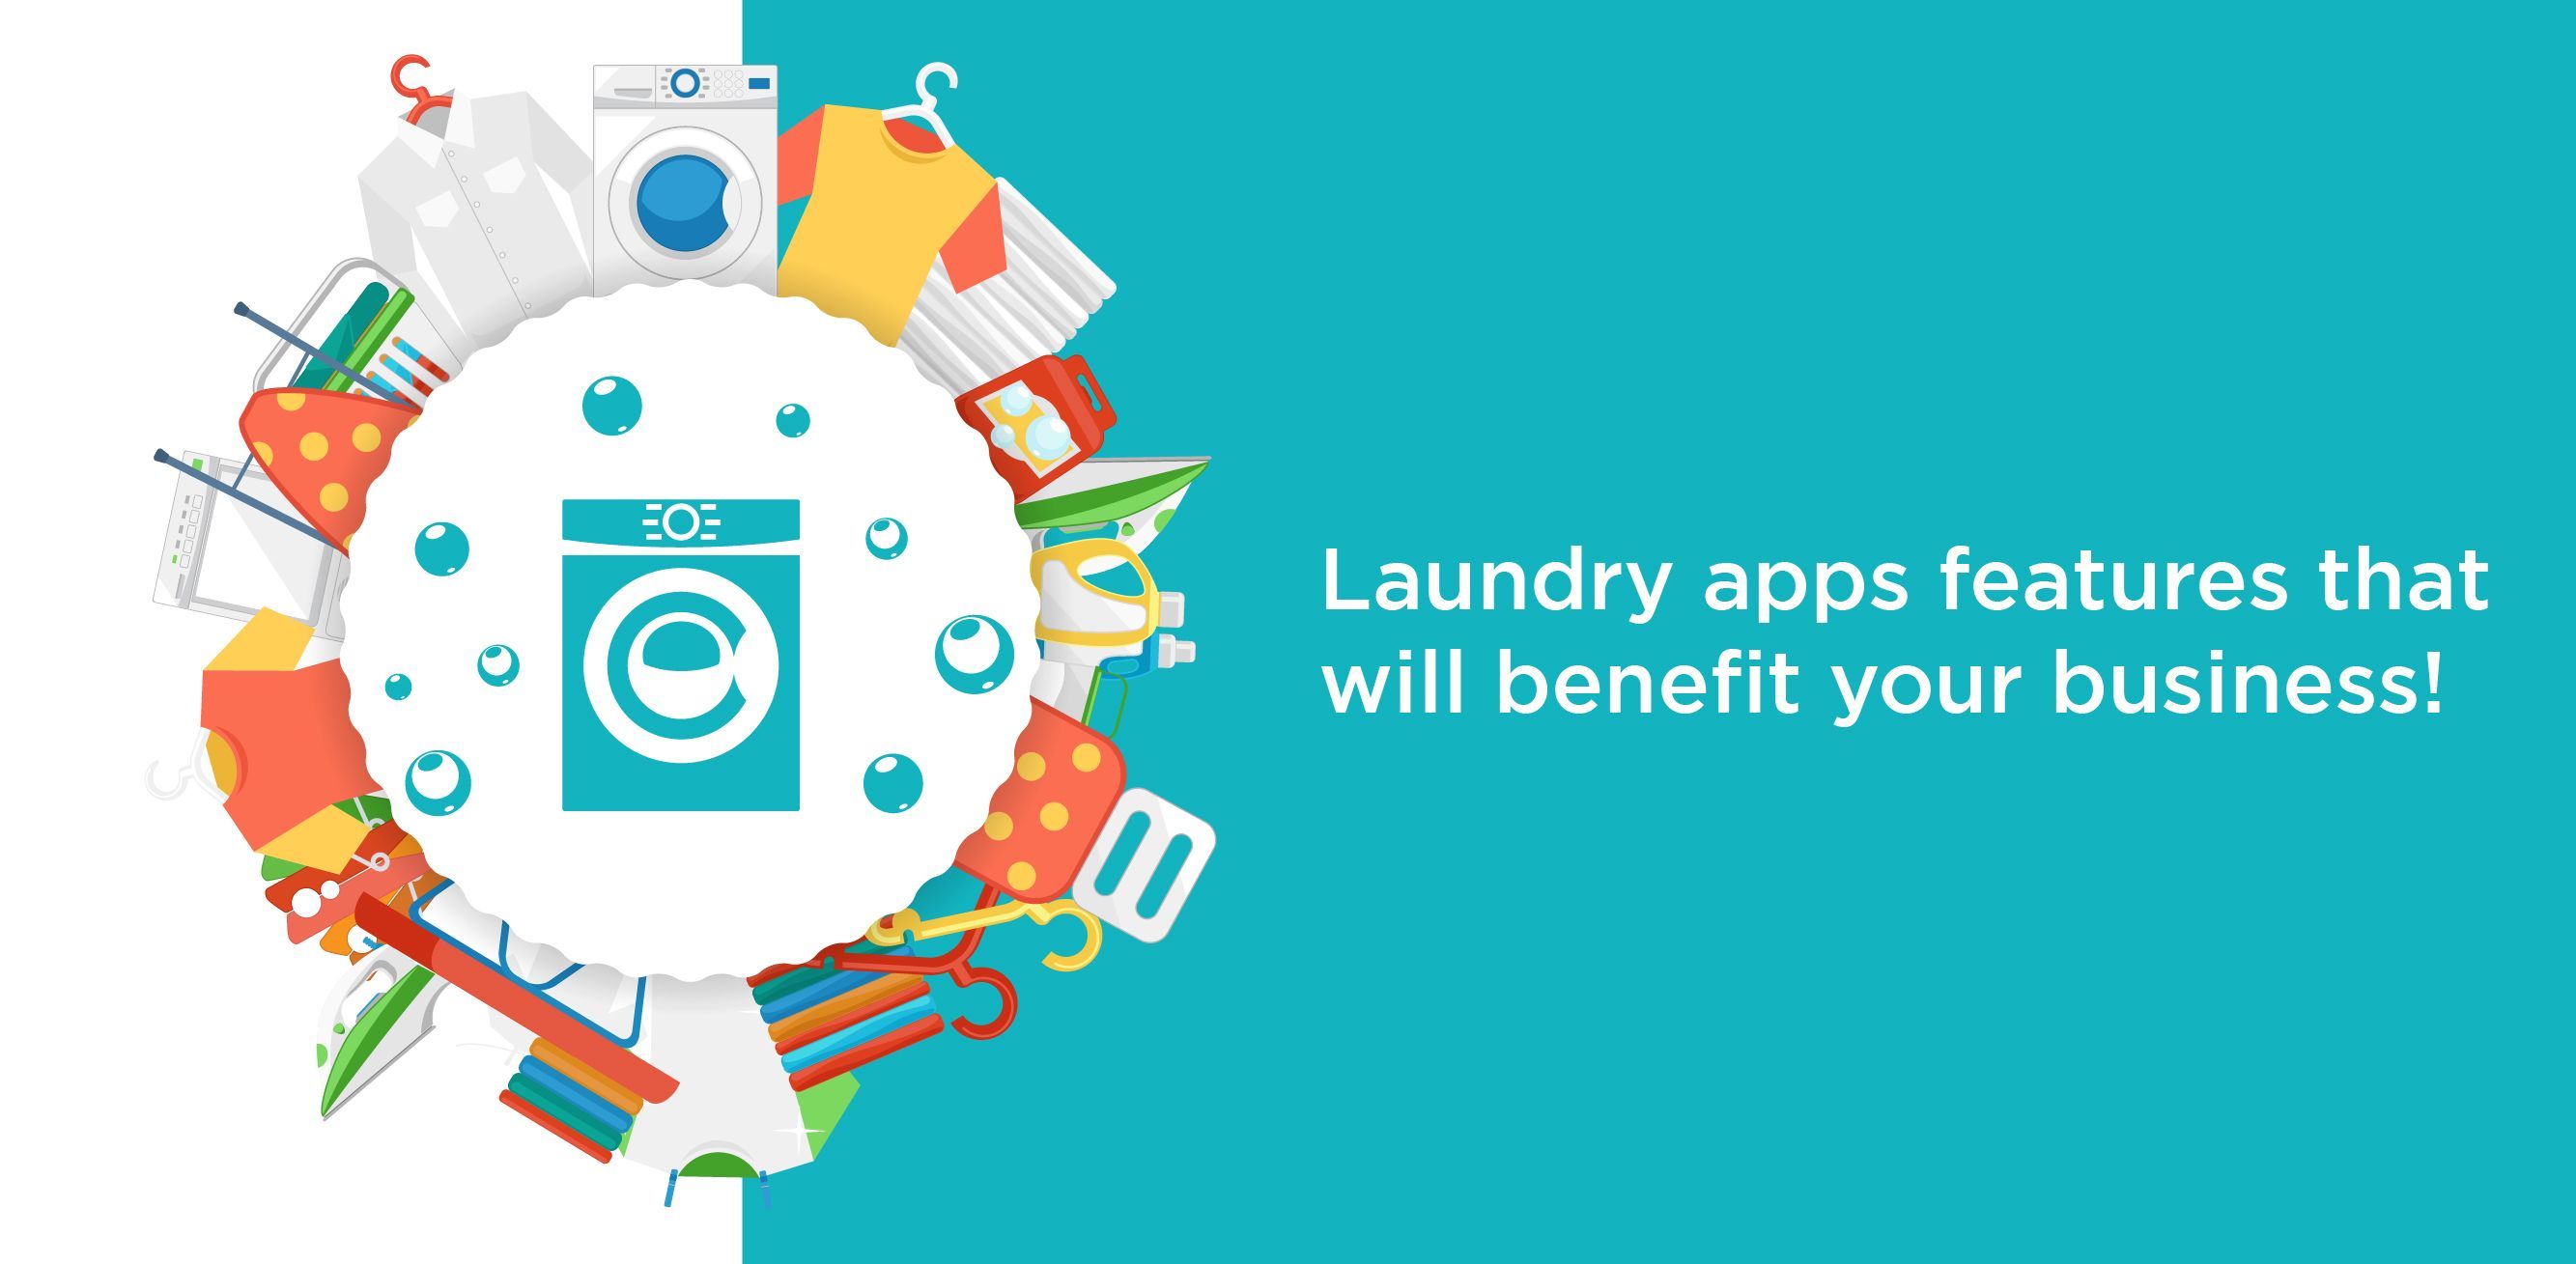 Laundry apps features that will benefit your business!